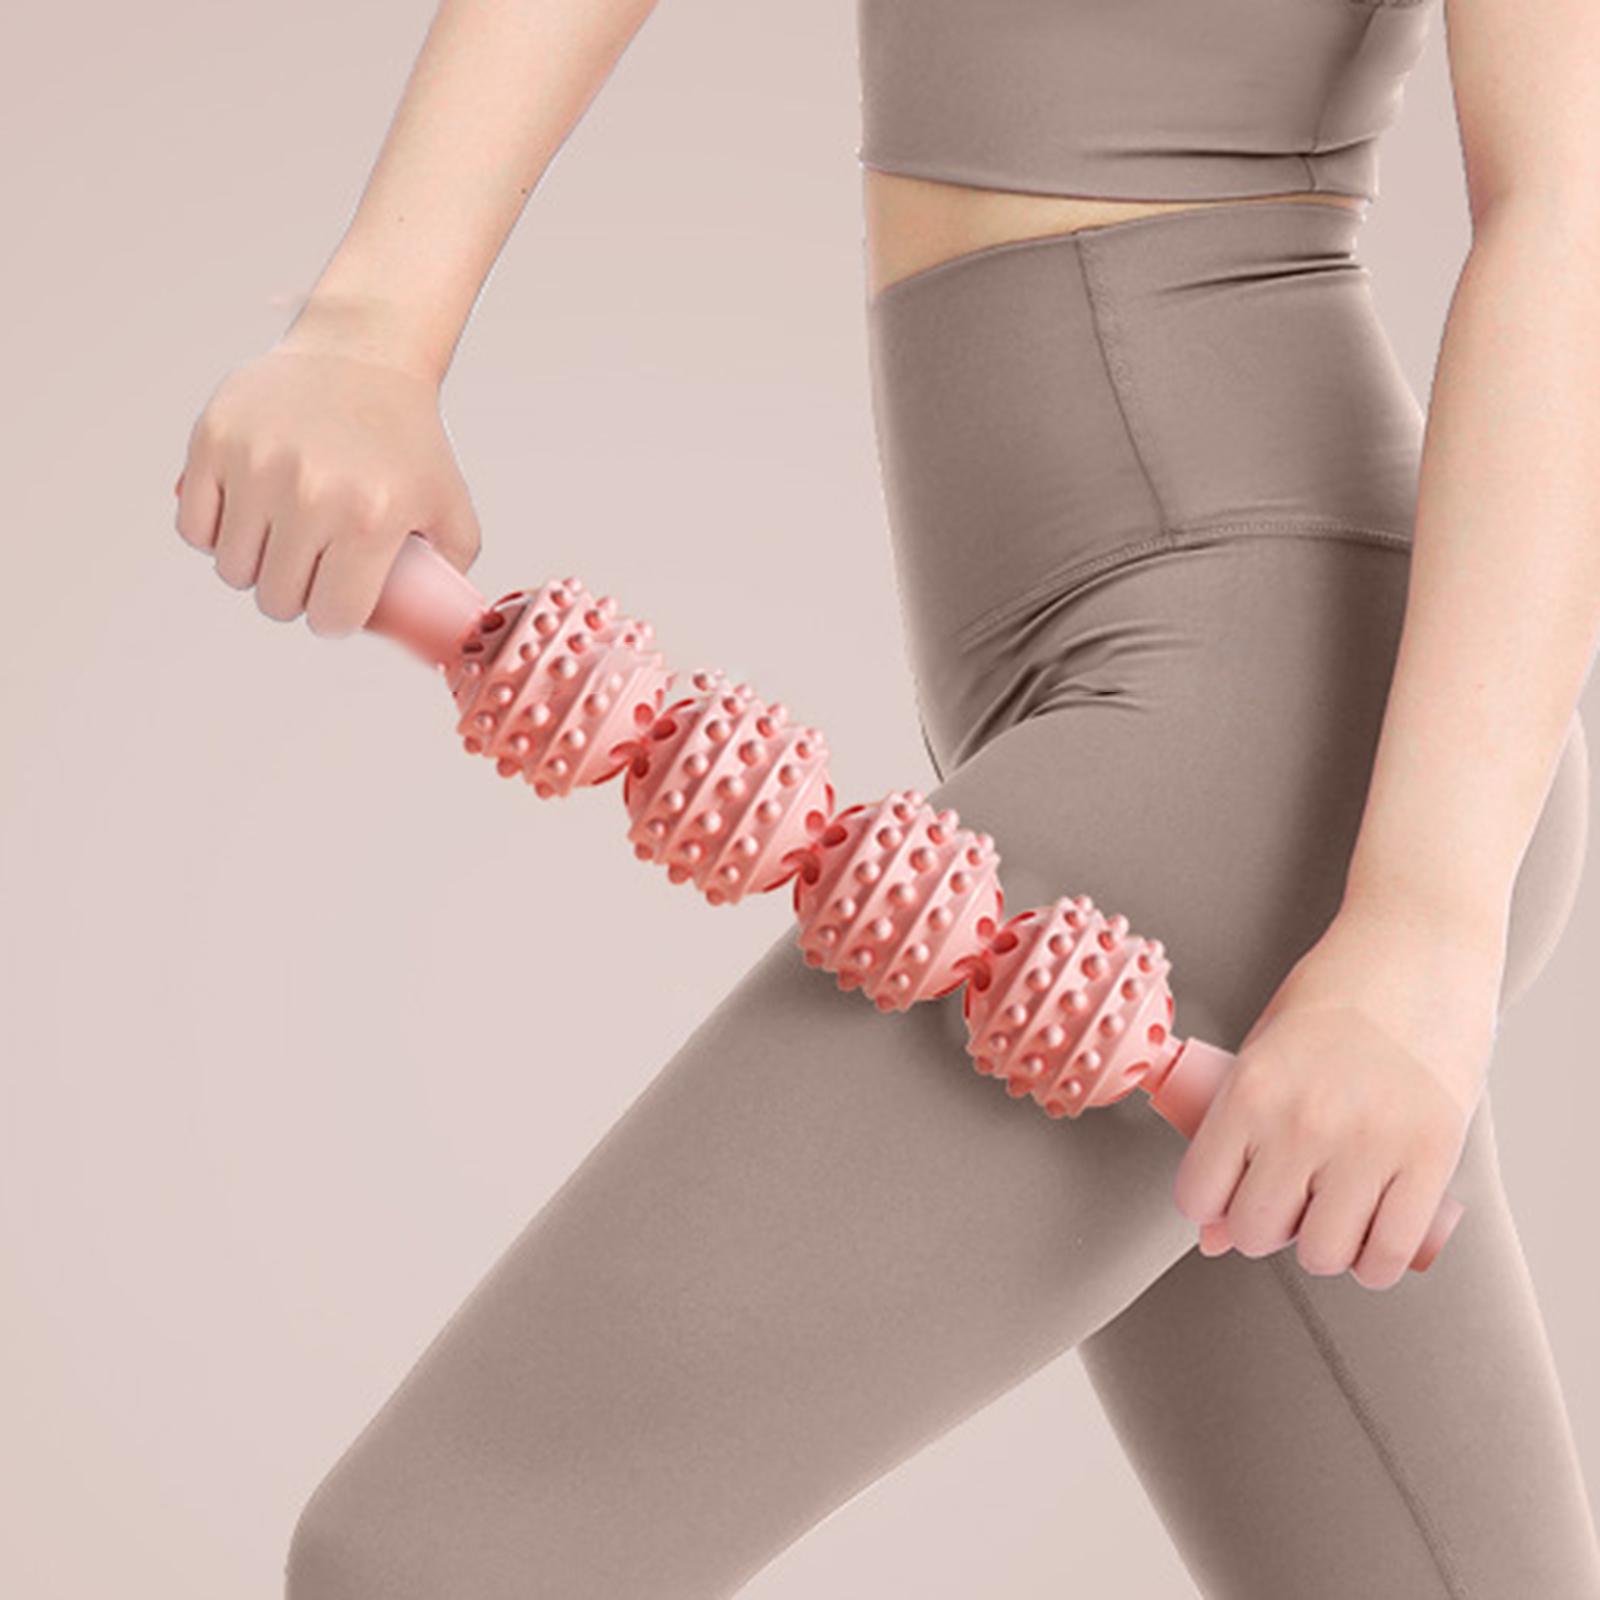 Massage Roller Stick Muscle Relaxer for Yoga Sports Fitness Equipment Pink